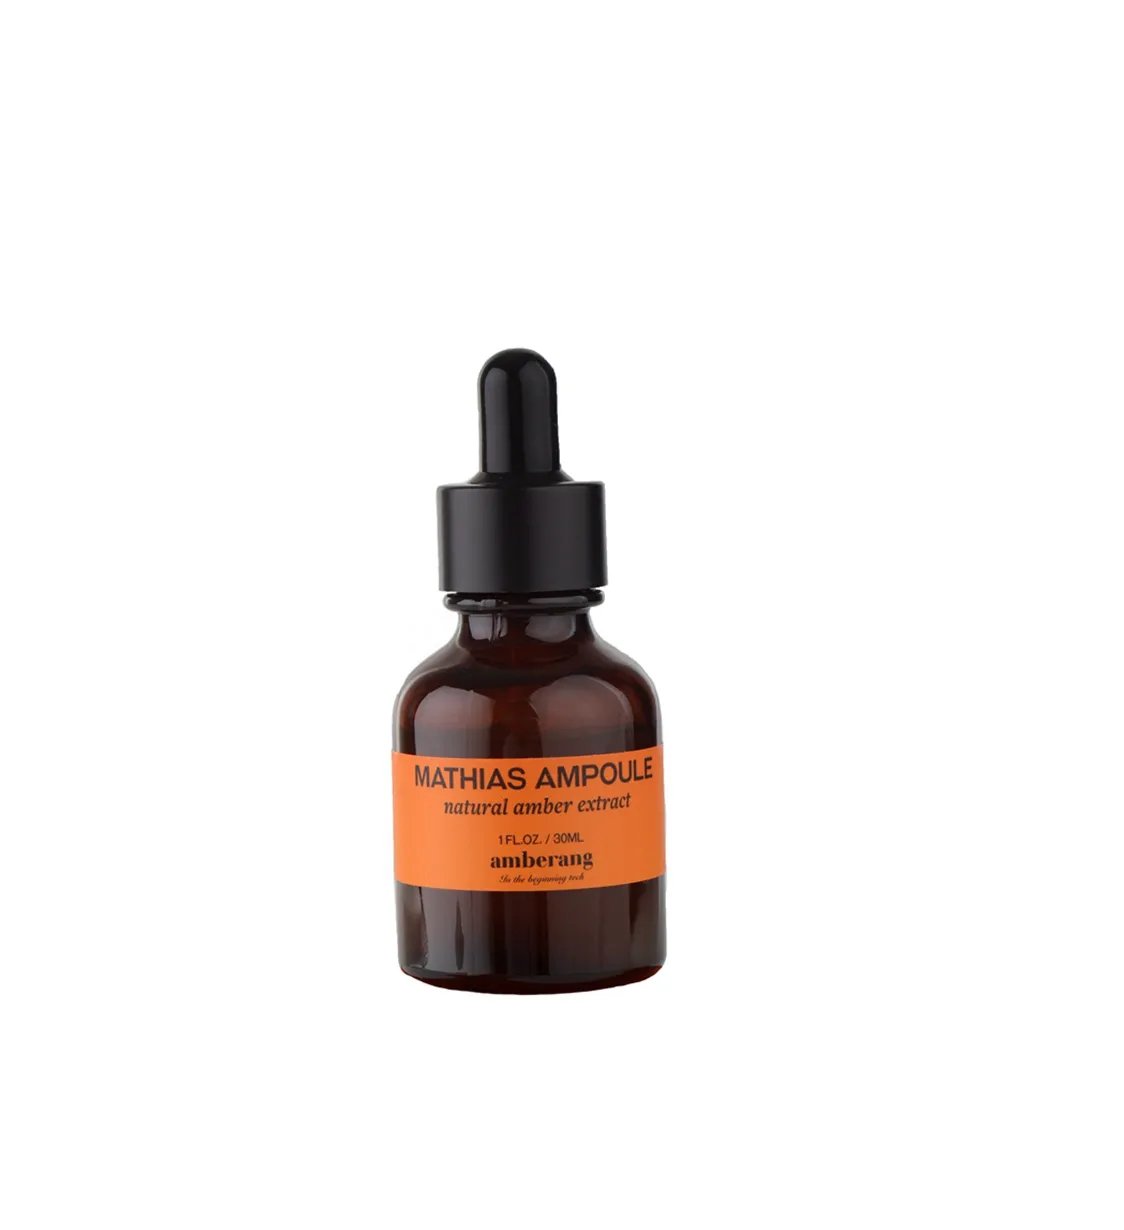 Manufacturer Sale Korean Skincare Product Ampoule/serum Helps Soothe Sensitive Skin And Replenish Moisture